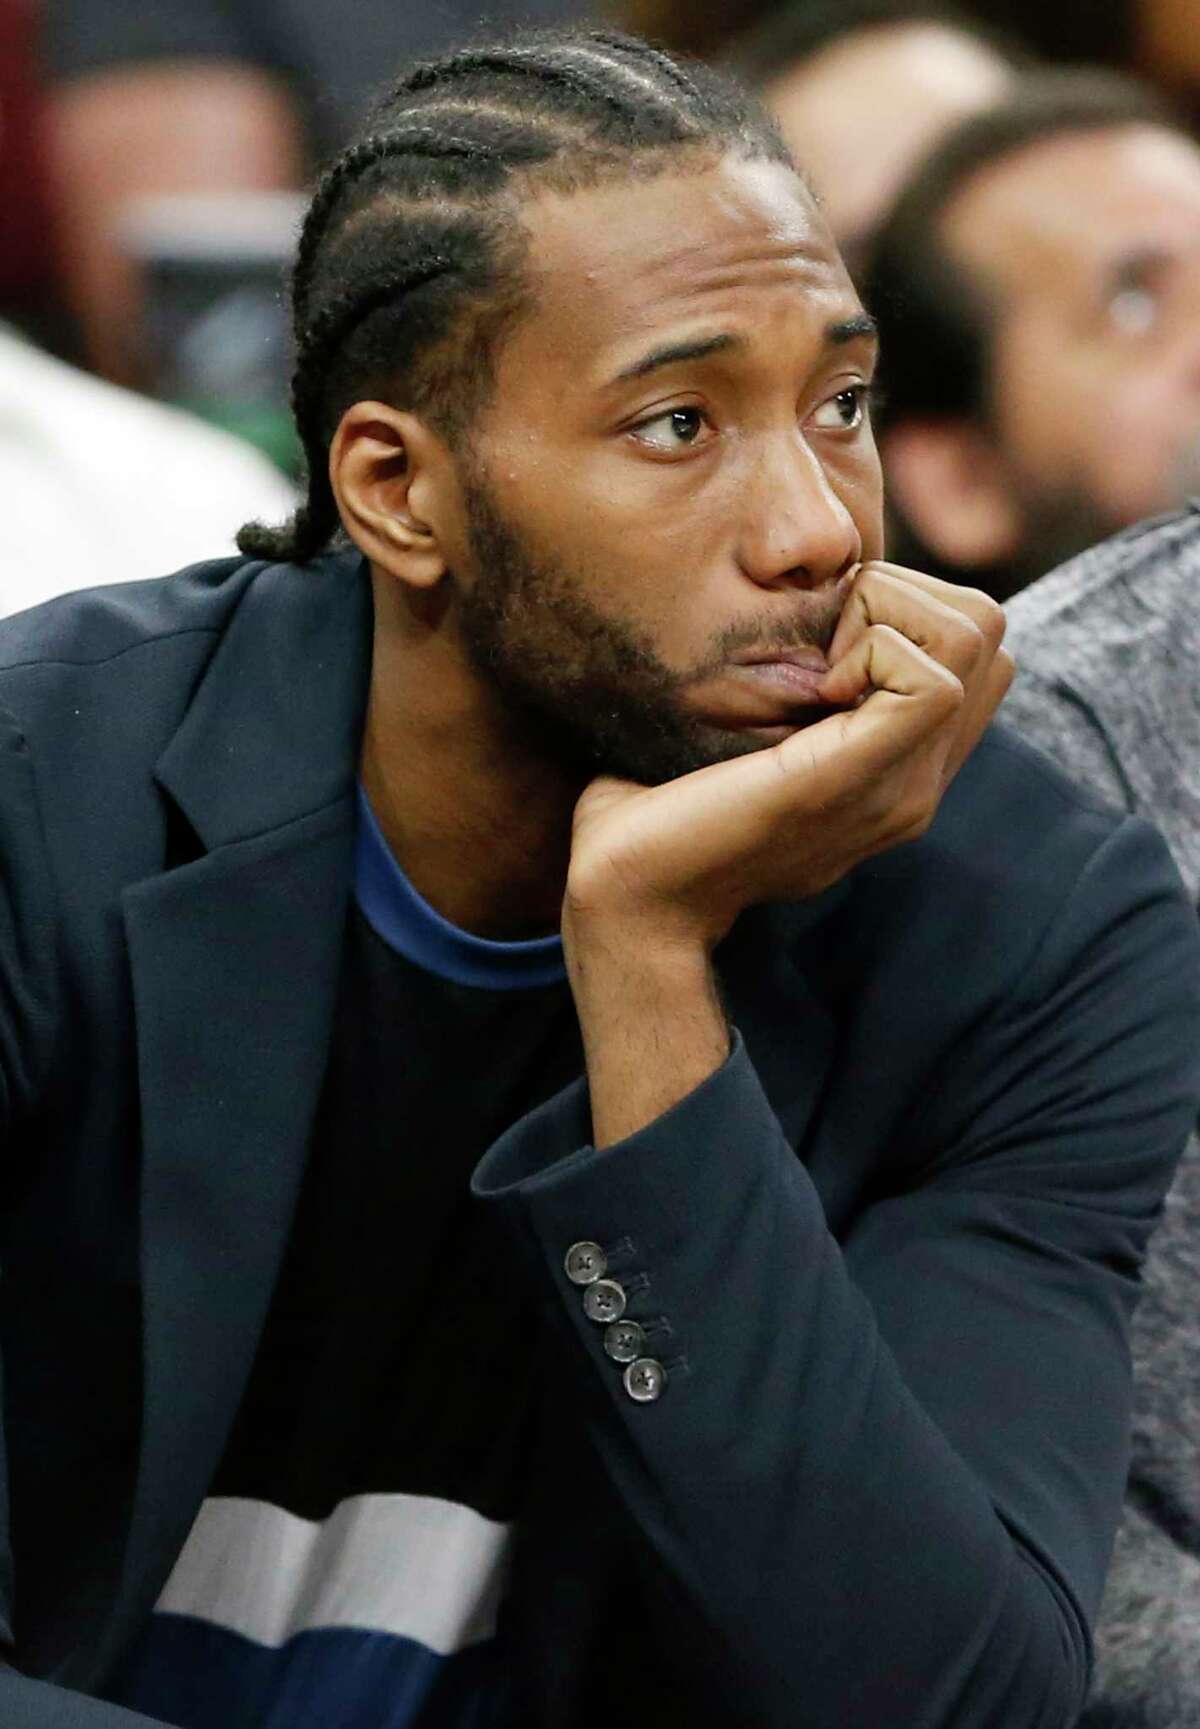 1. Will Kawhi Leonard be a Spur next season? A question that has loomed over the team all season will be answered this summer, will fans see Leonard back in a Spurs uniform and will the team offer him the $219 million supermax contract he is eligible for? Leonard played in just nine games this season as he rehabbed a right quadriceps injury and rumors have swirled about other teams seeking a trade for the All-Star.